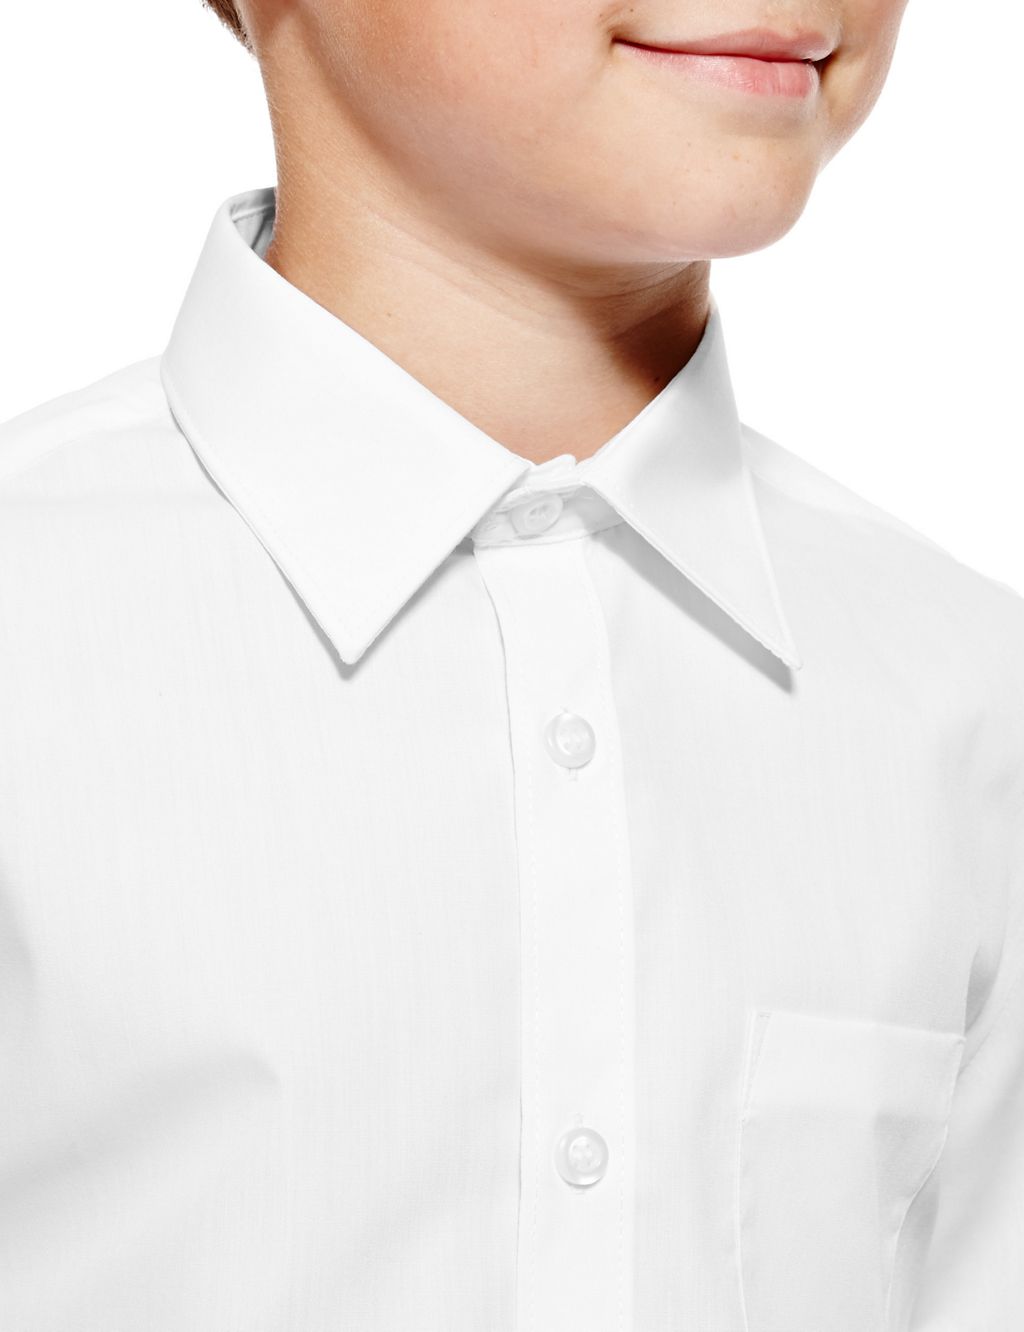 2 Pack Boys' Pure Cotton Shirts 6 of 7